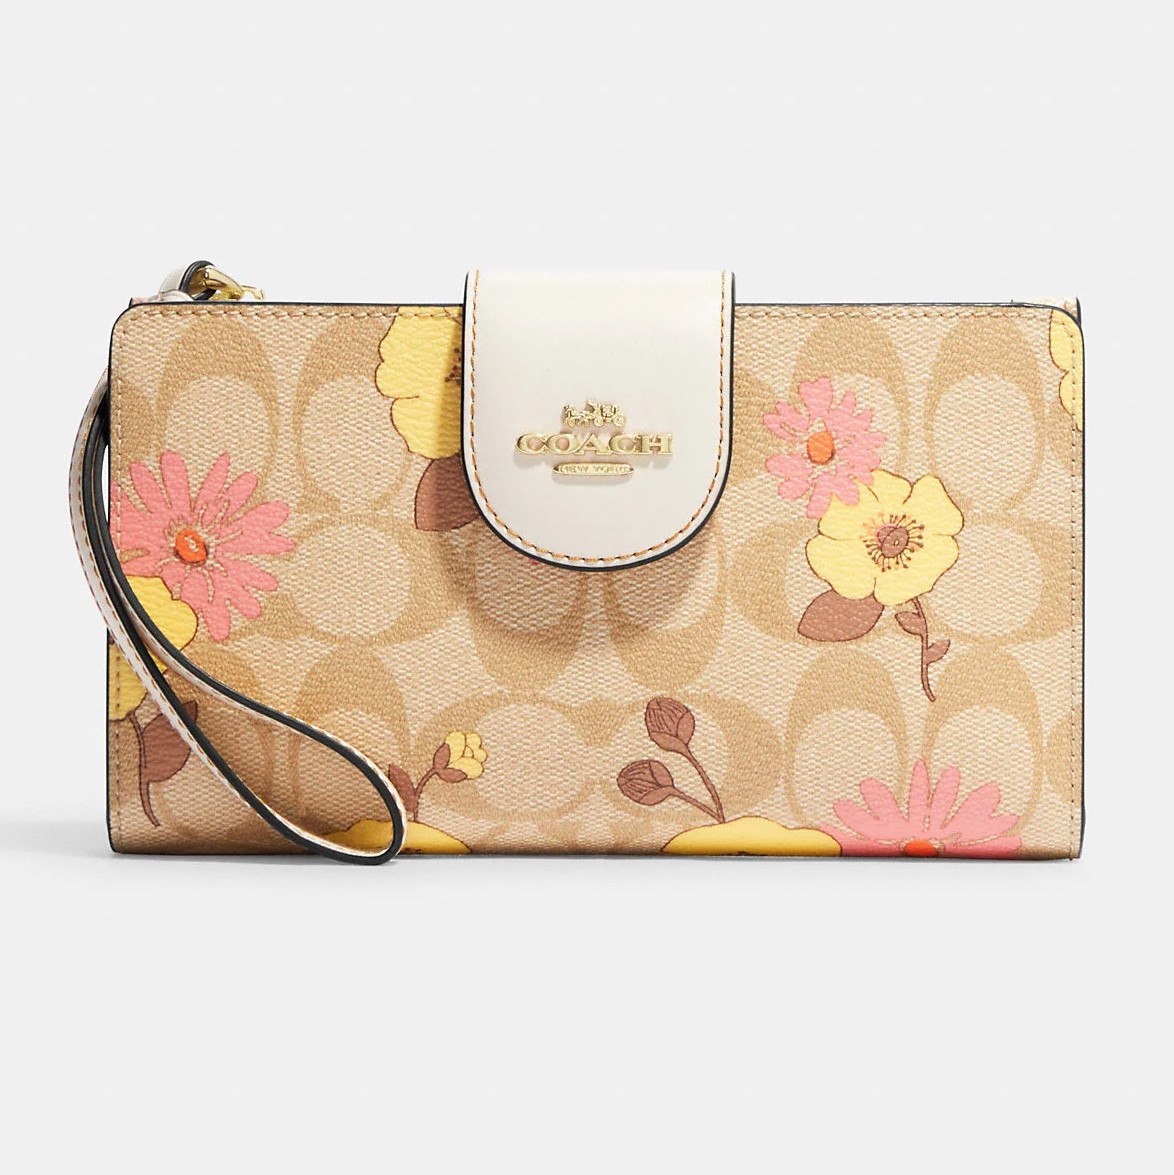 VÍ NỮ CẦM TAYCOACH IN HOA TECH WALLET IN SIGNATURE CANVAS WITH FLORAL CLUSTER PRINT CH720 4